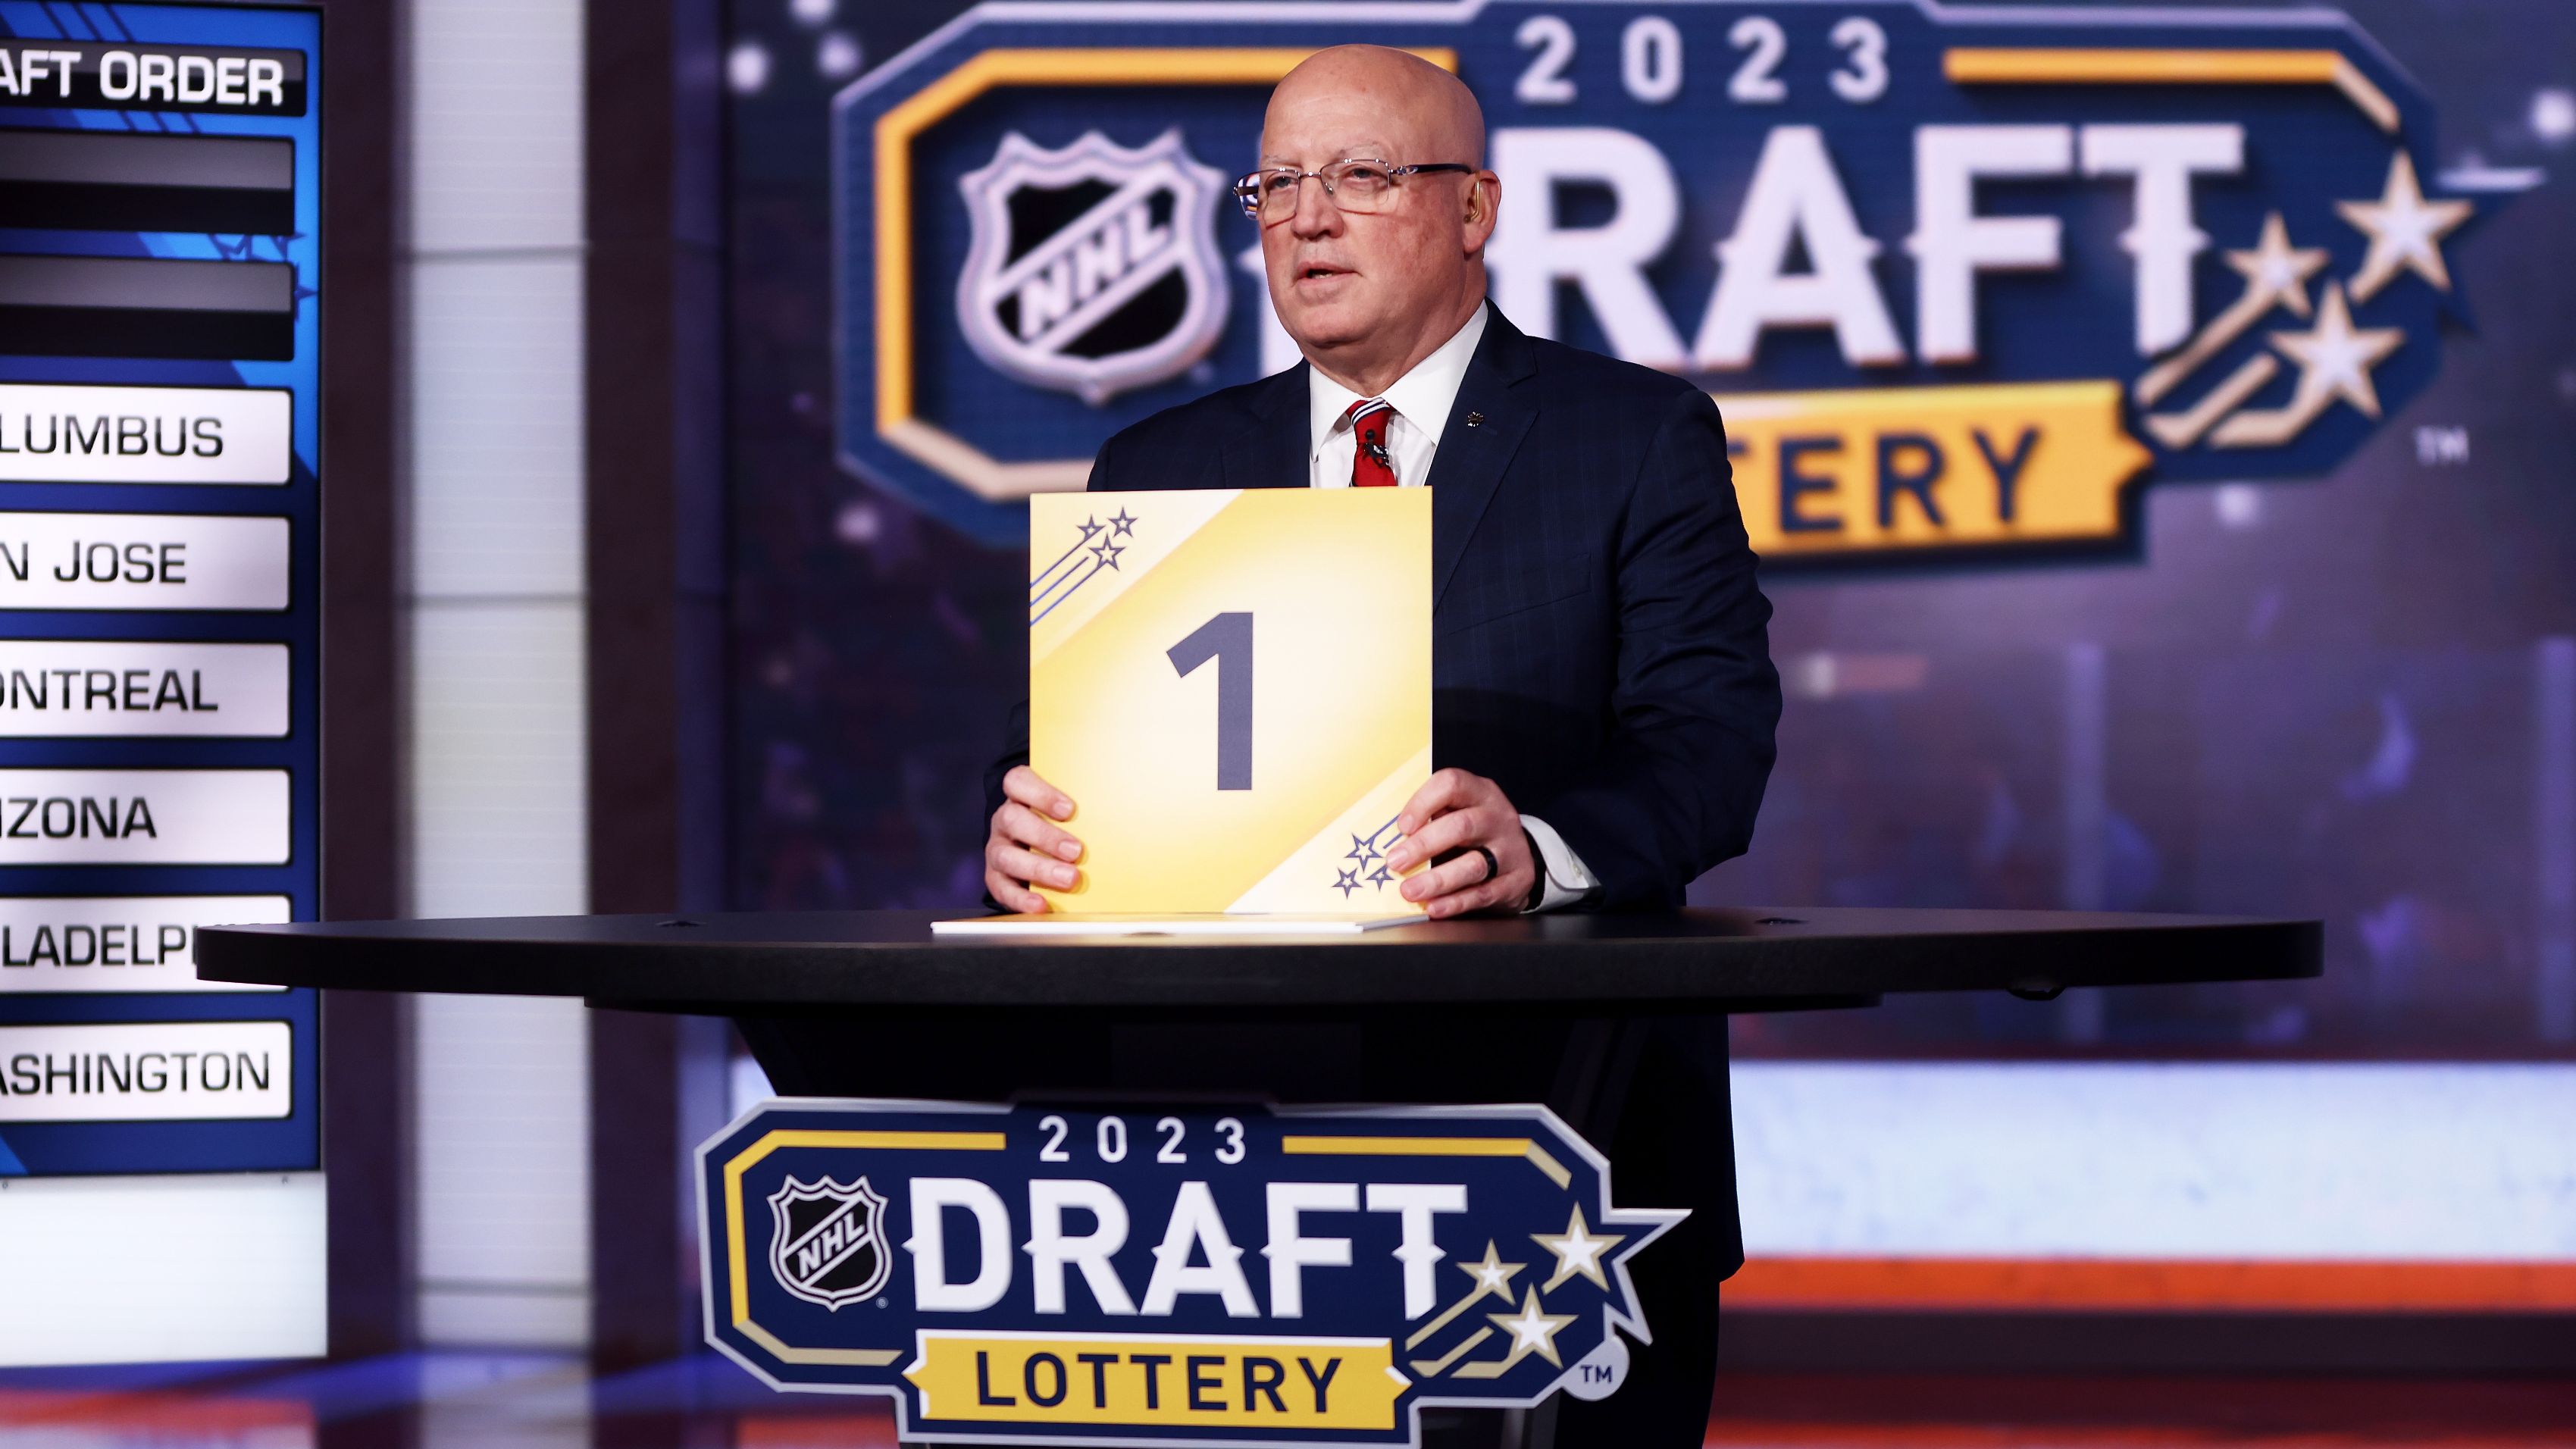 "Incredible, changes everything": Examining the fallout from the 2023 NHL Draft Lottery